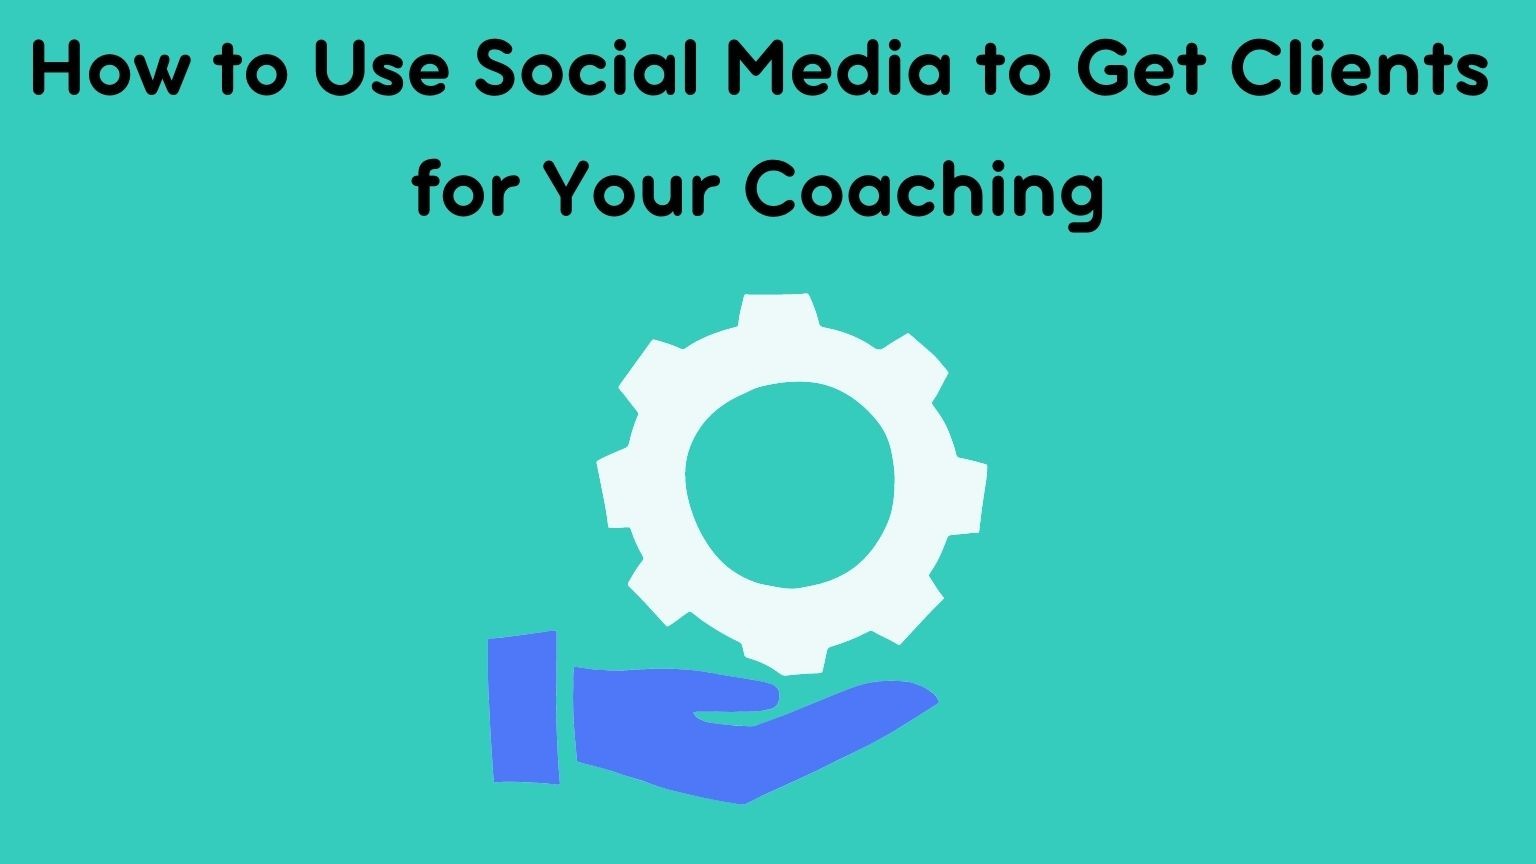 How to Use Social Media to Get Clients for Your Coaching